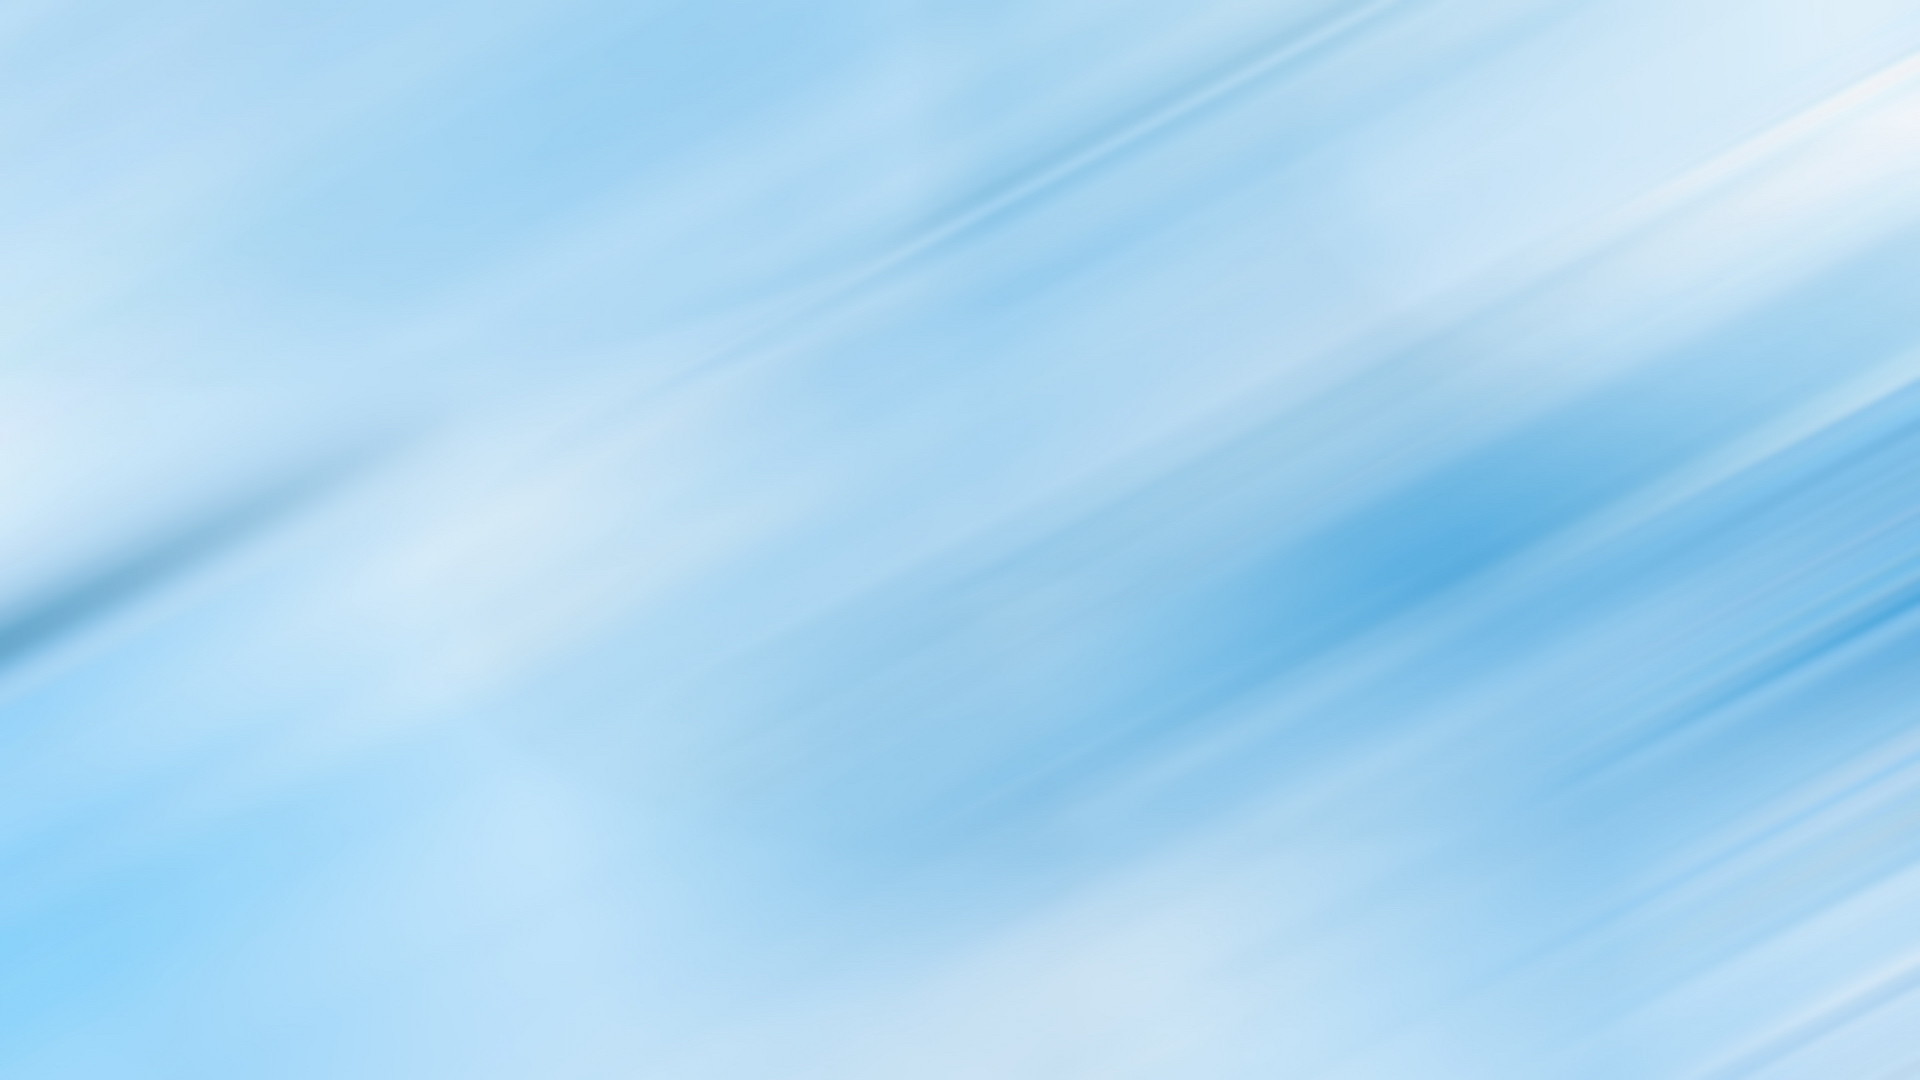 Sky Blue Background Images HD Pictures and Wallpaper For Free Download   Pngtree